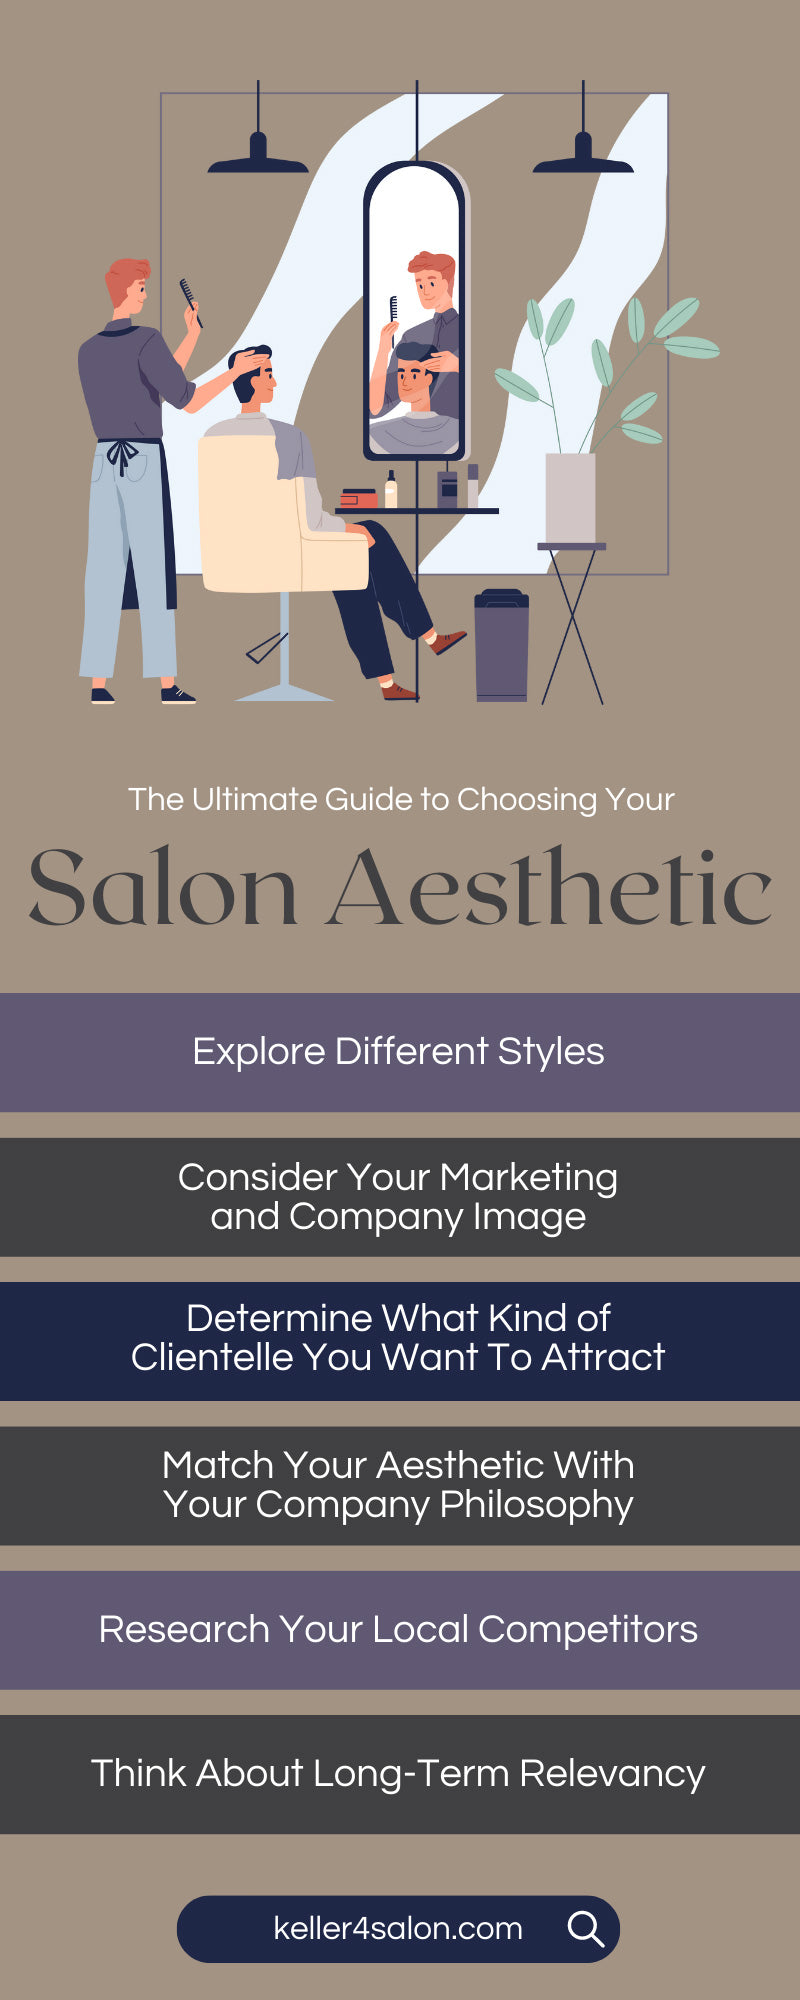 The Ultimate Guide to Choosing Your Salon Aesthetic